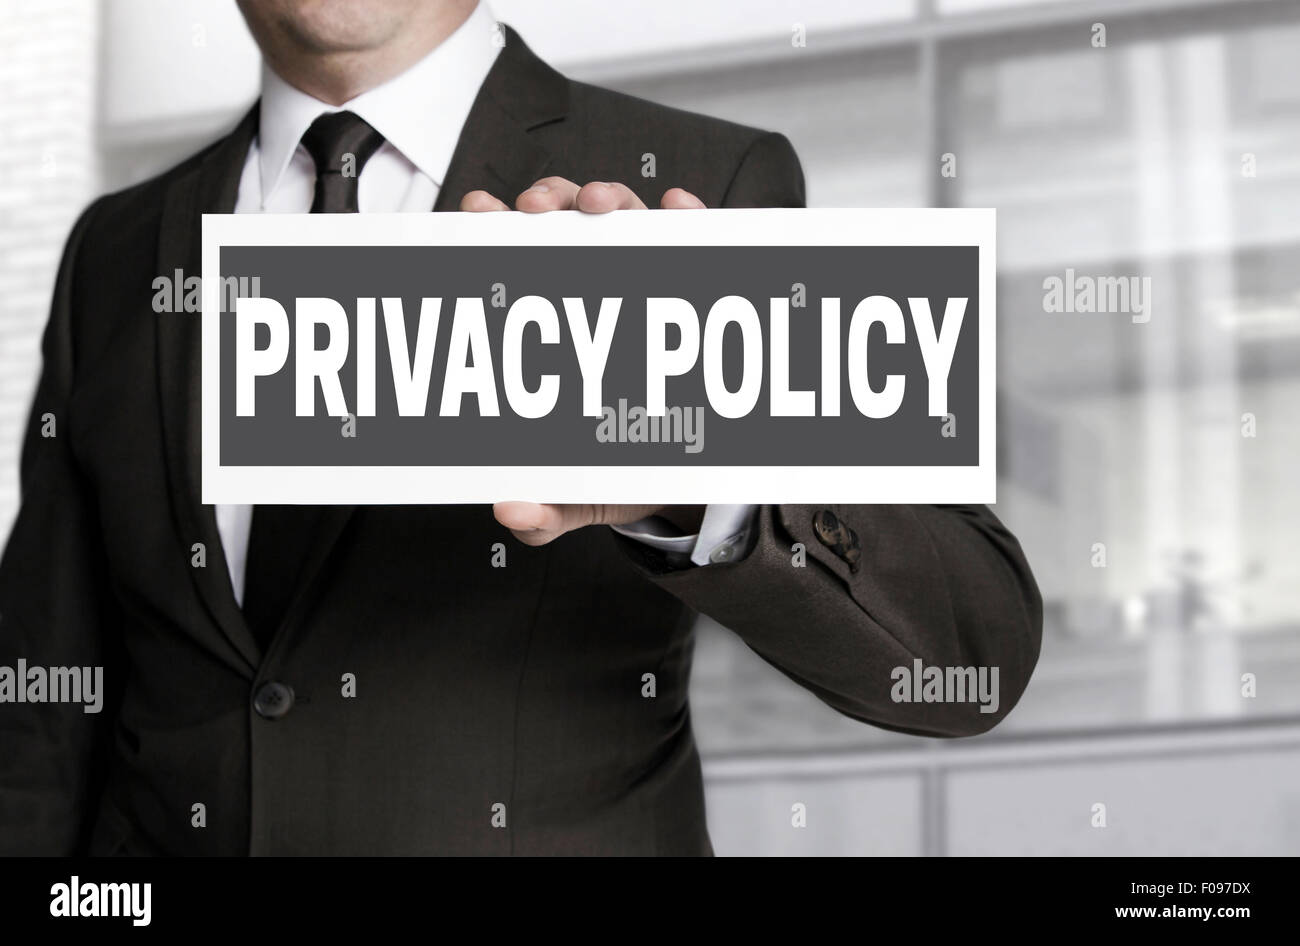 Privacy Policy sign is held by businessman. Stock Photo